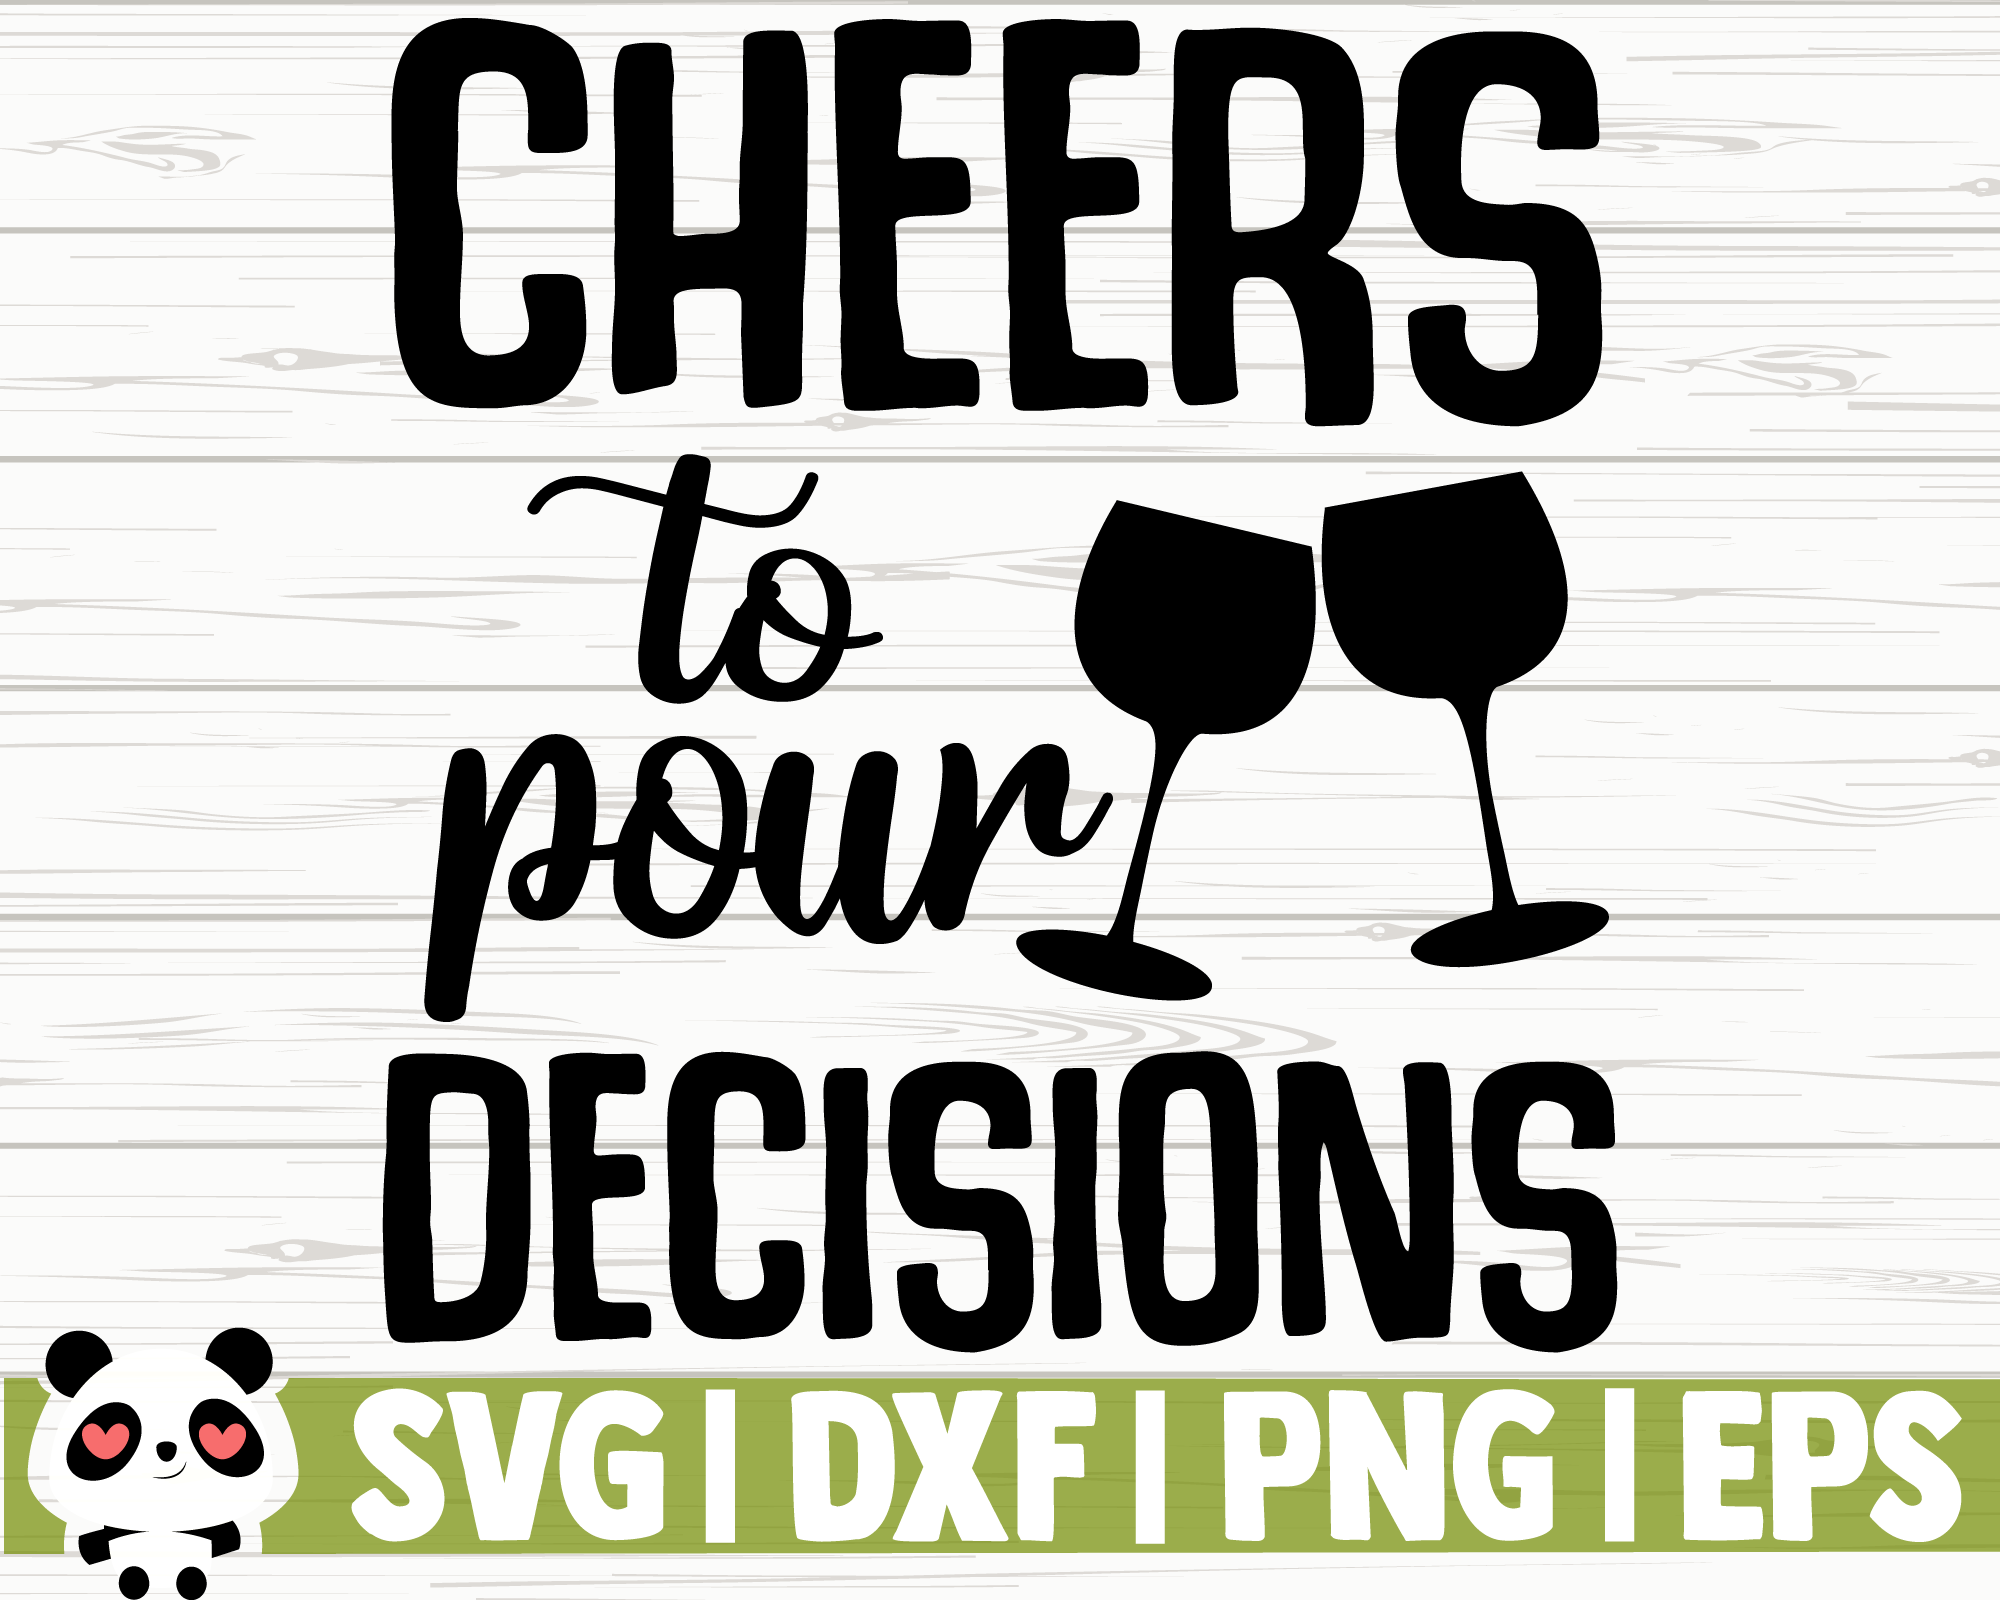 Cheers To Pour Decisions By Creativedesignsllc Thehungryjpeg Com